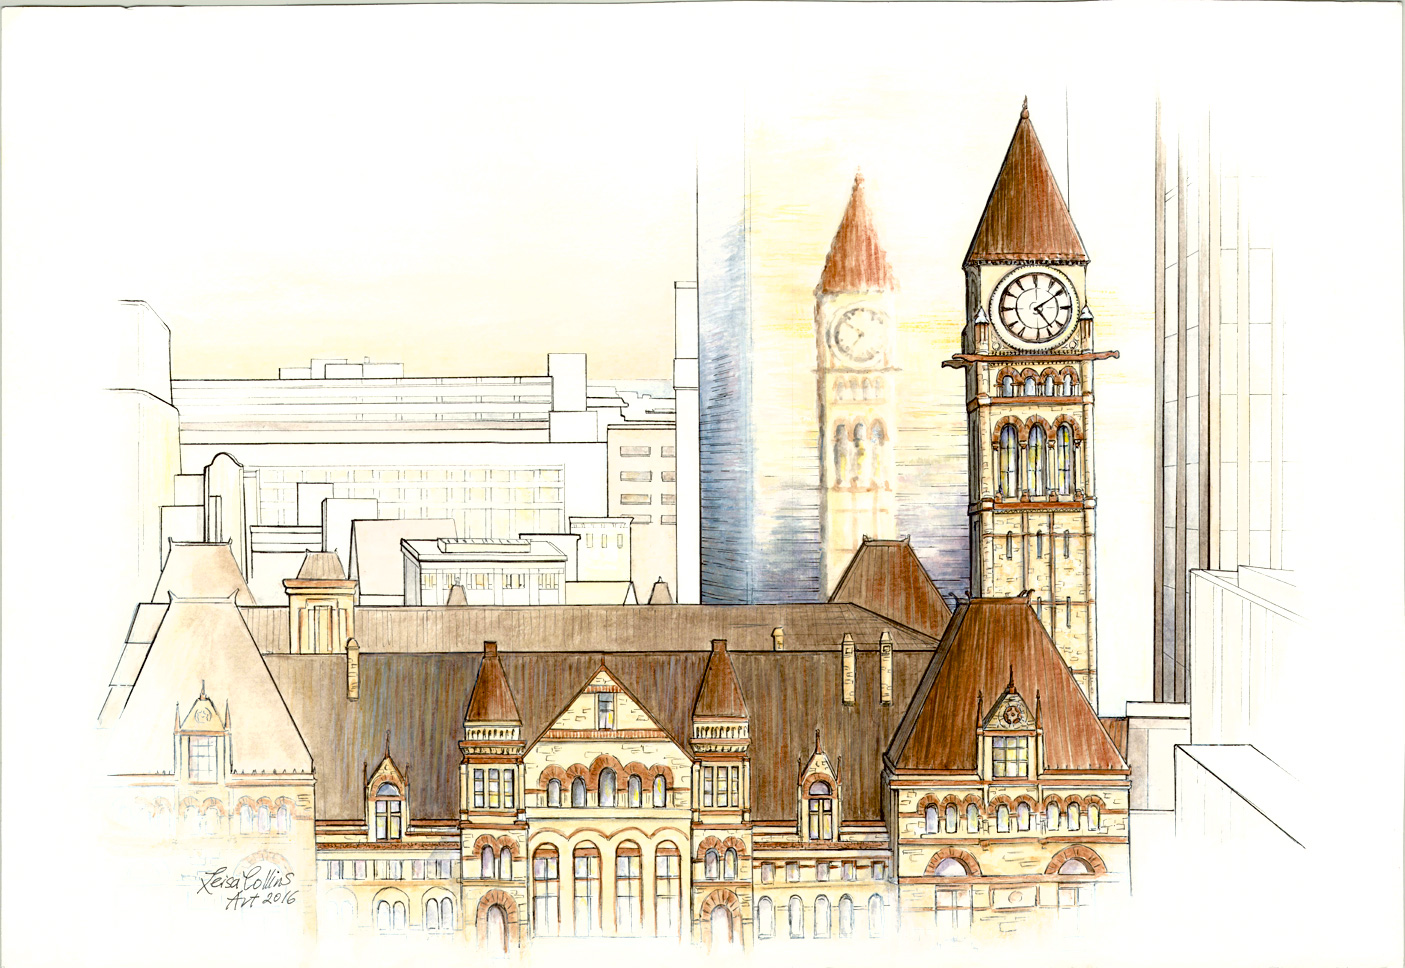 OPTArchitectural-Fusion---Old-City-Hall-Toronto-----Pen-&-Watercolor-13-x-19-inches-on-paper